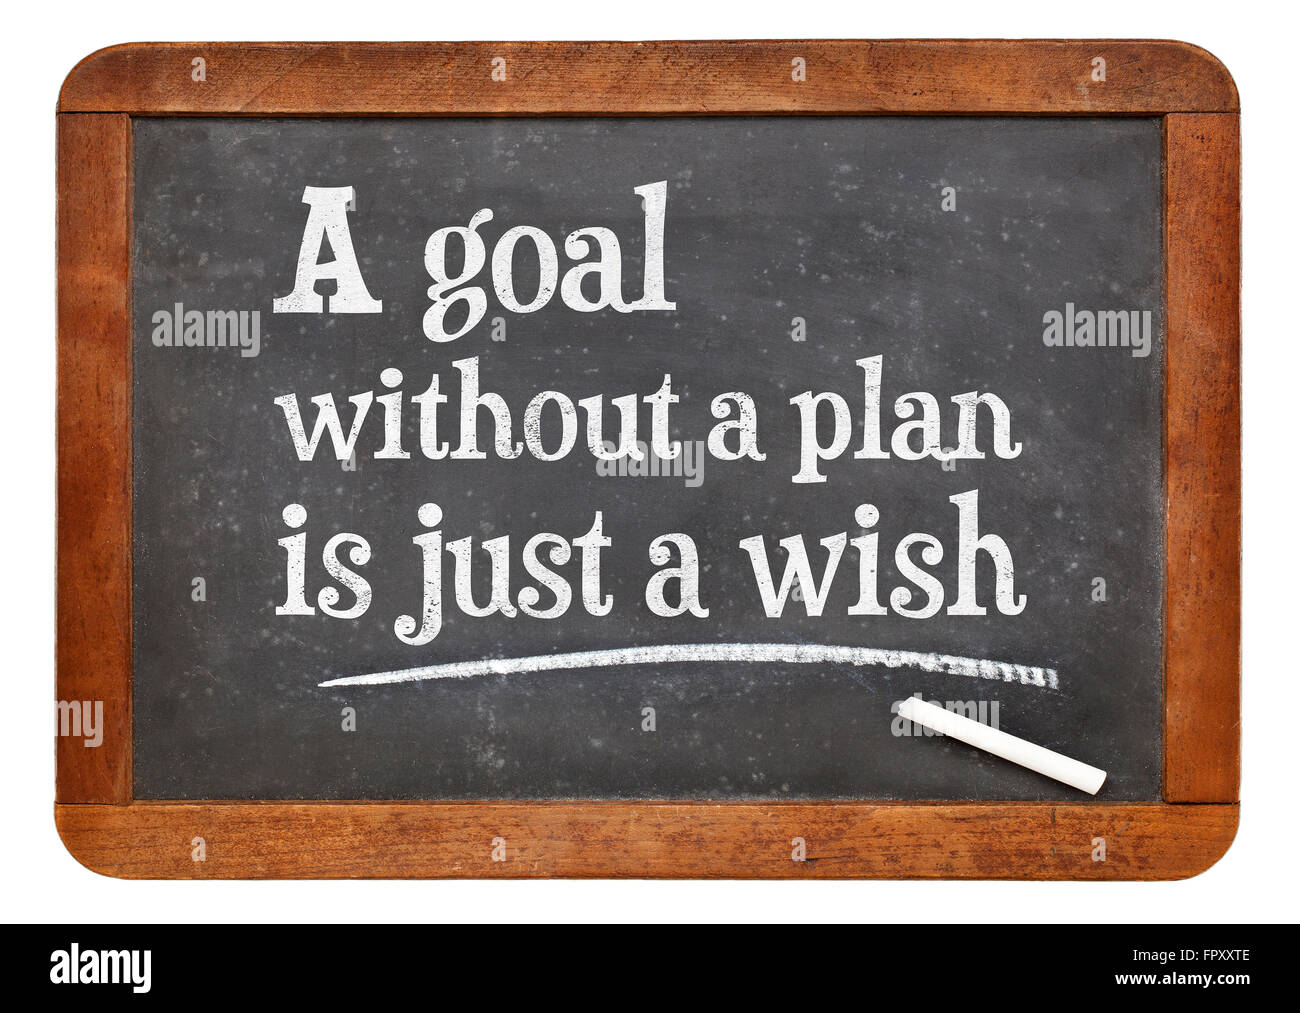 A goal without plan is just a wish - advice or reminder - white chalk text on a vintage slate blackboard Stock Photo